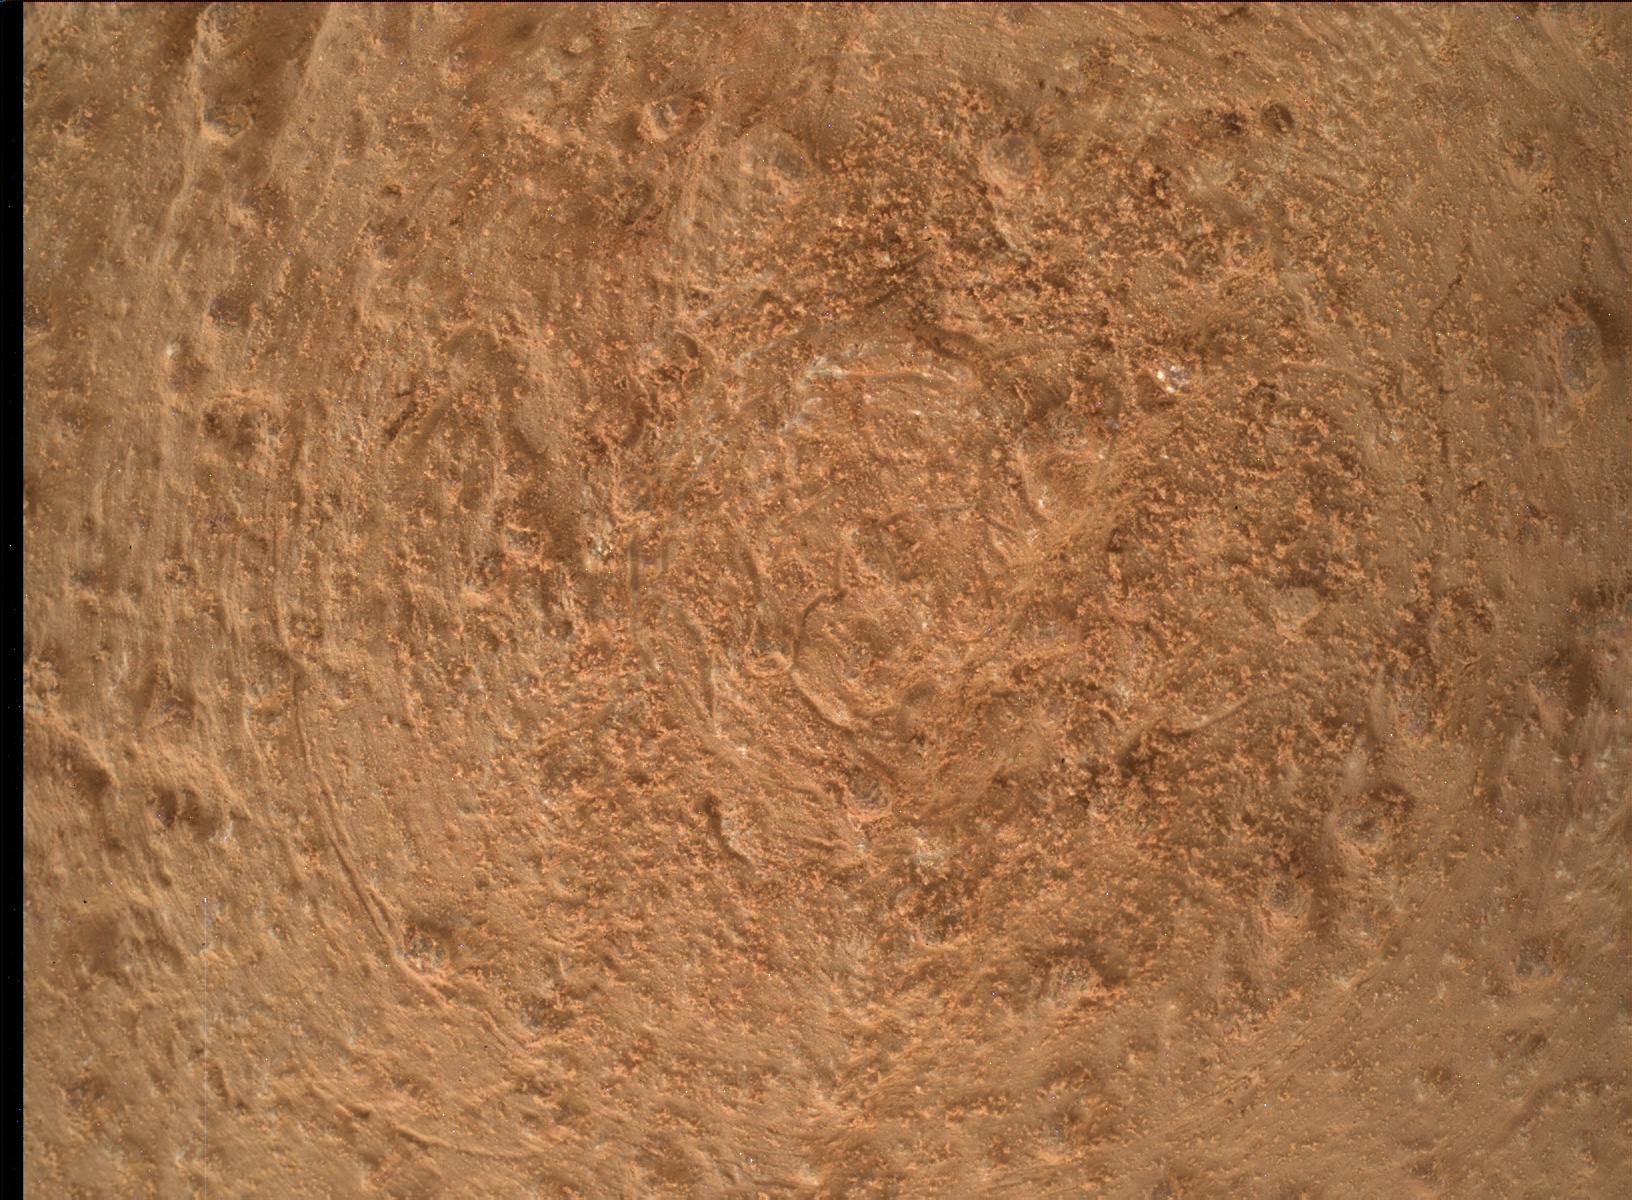 Nasa's Mars rover Curiosity acquired this image using its Mars Hand Lens Imager (MAHLI) on Sol 3371